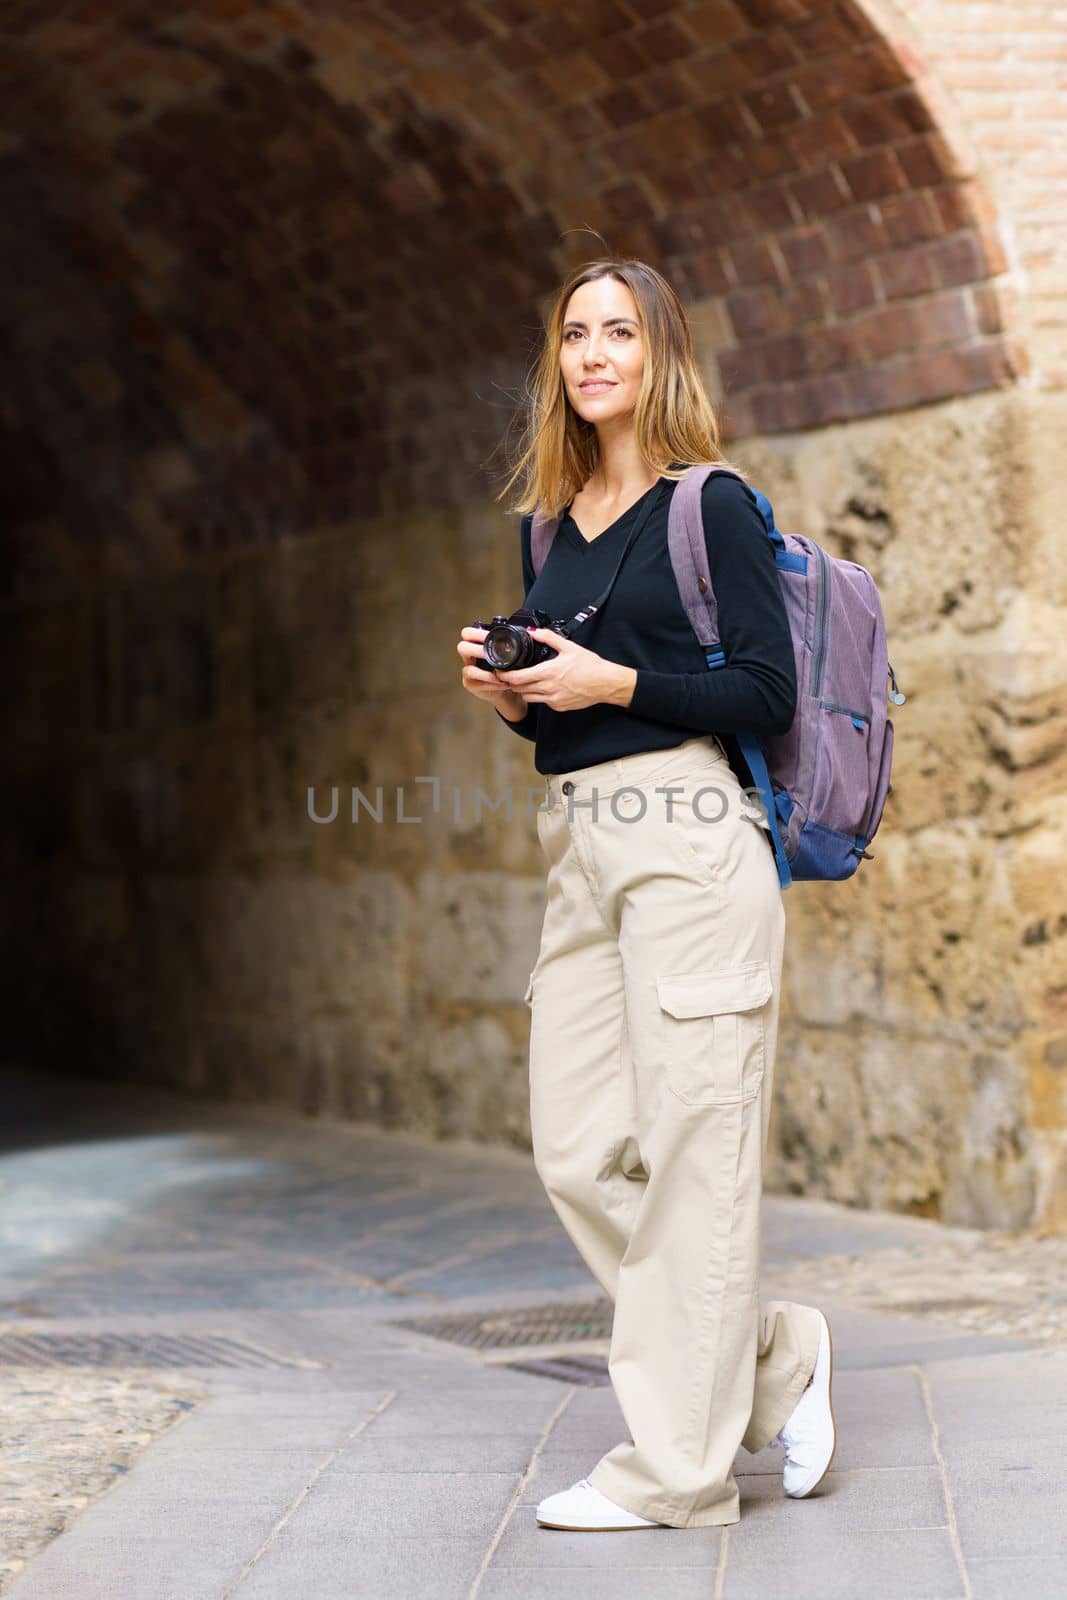 Confident female photographer standing near aged archway during trip by javiindy